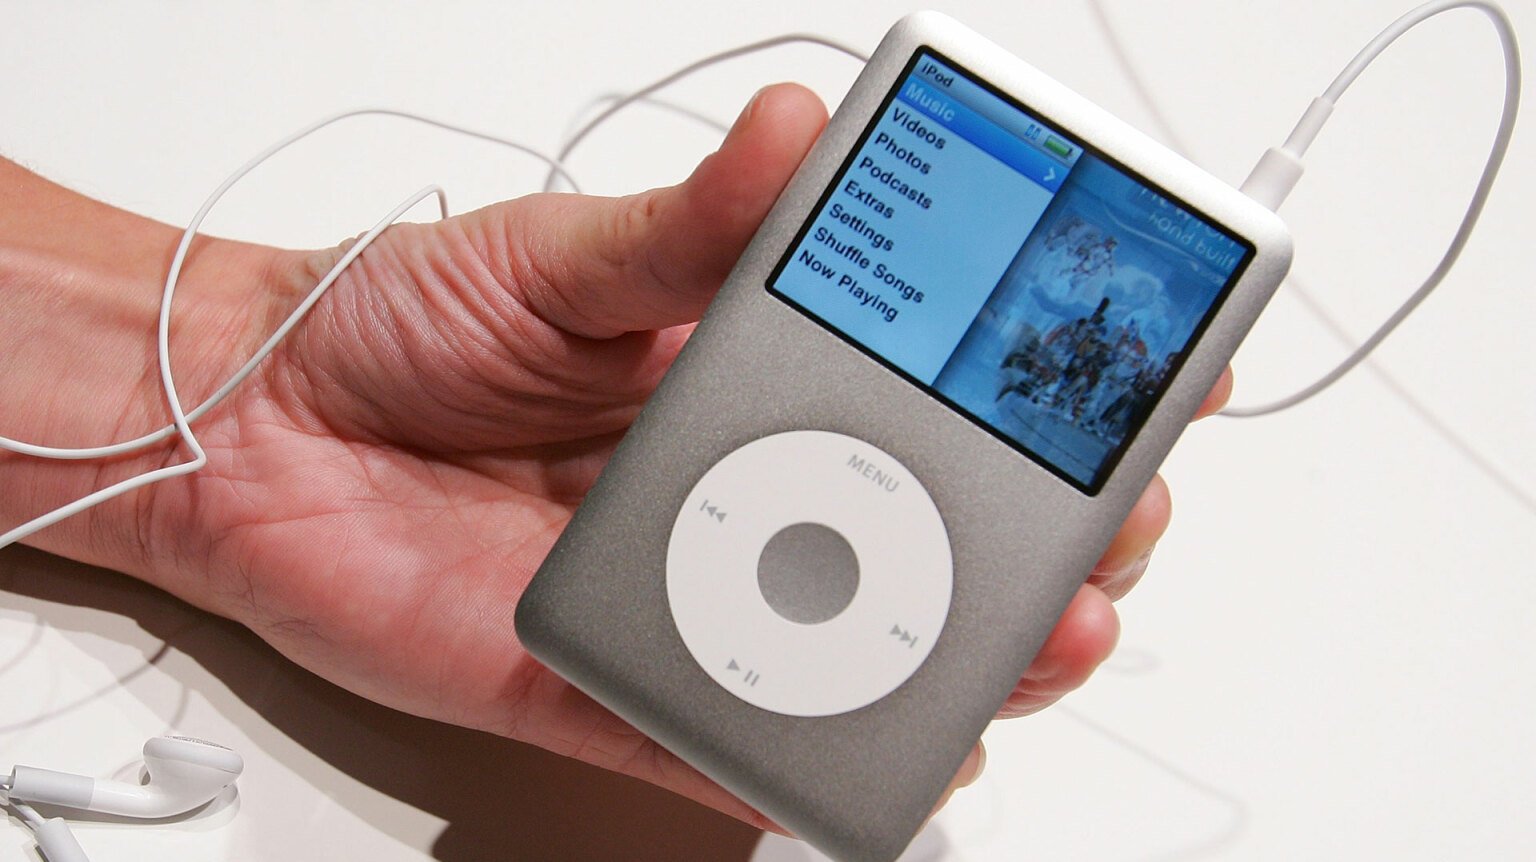 A close-up of a person holding an iPod Classic.